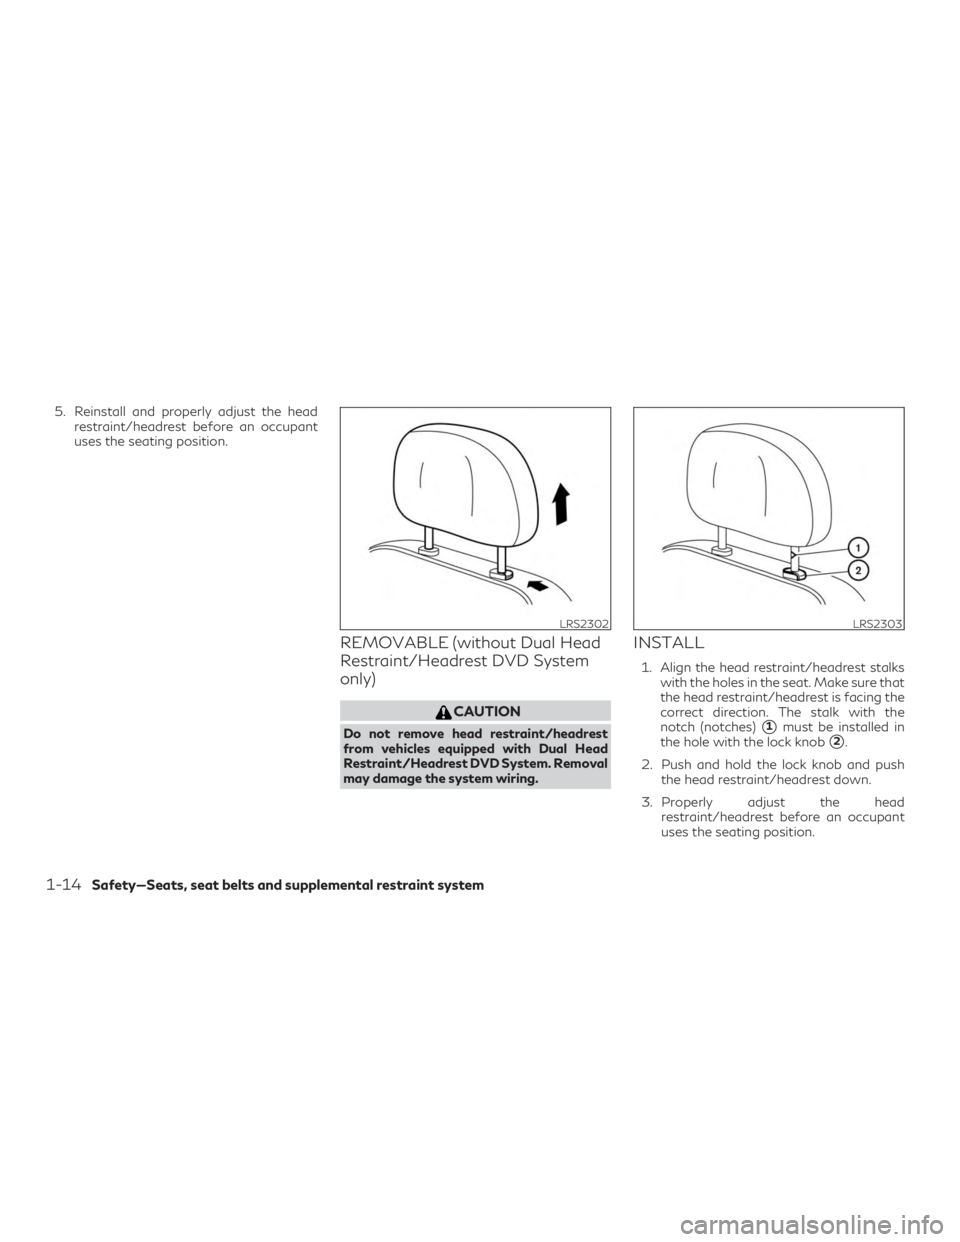 INFINITI QX60 2018  Owners Manual 5. Reinstall and properly adjust the headrestraint/headrest before an occupant
uses the seating position.
REMOVABLE (without Dual Head
Restraint/Headrest DVD System
only)
CAUTION
Do not remove head re